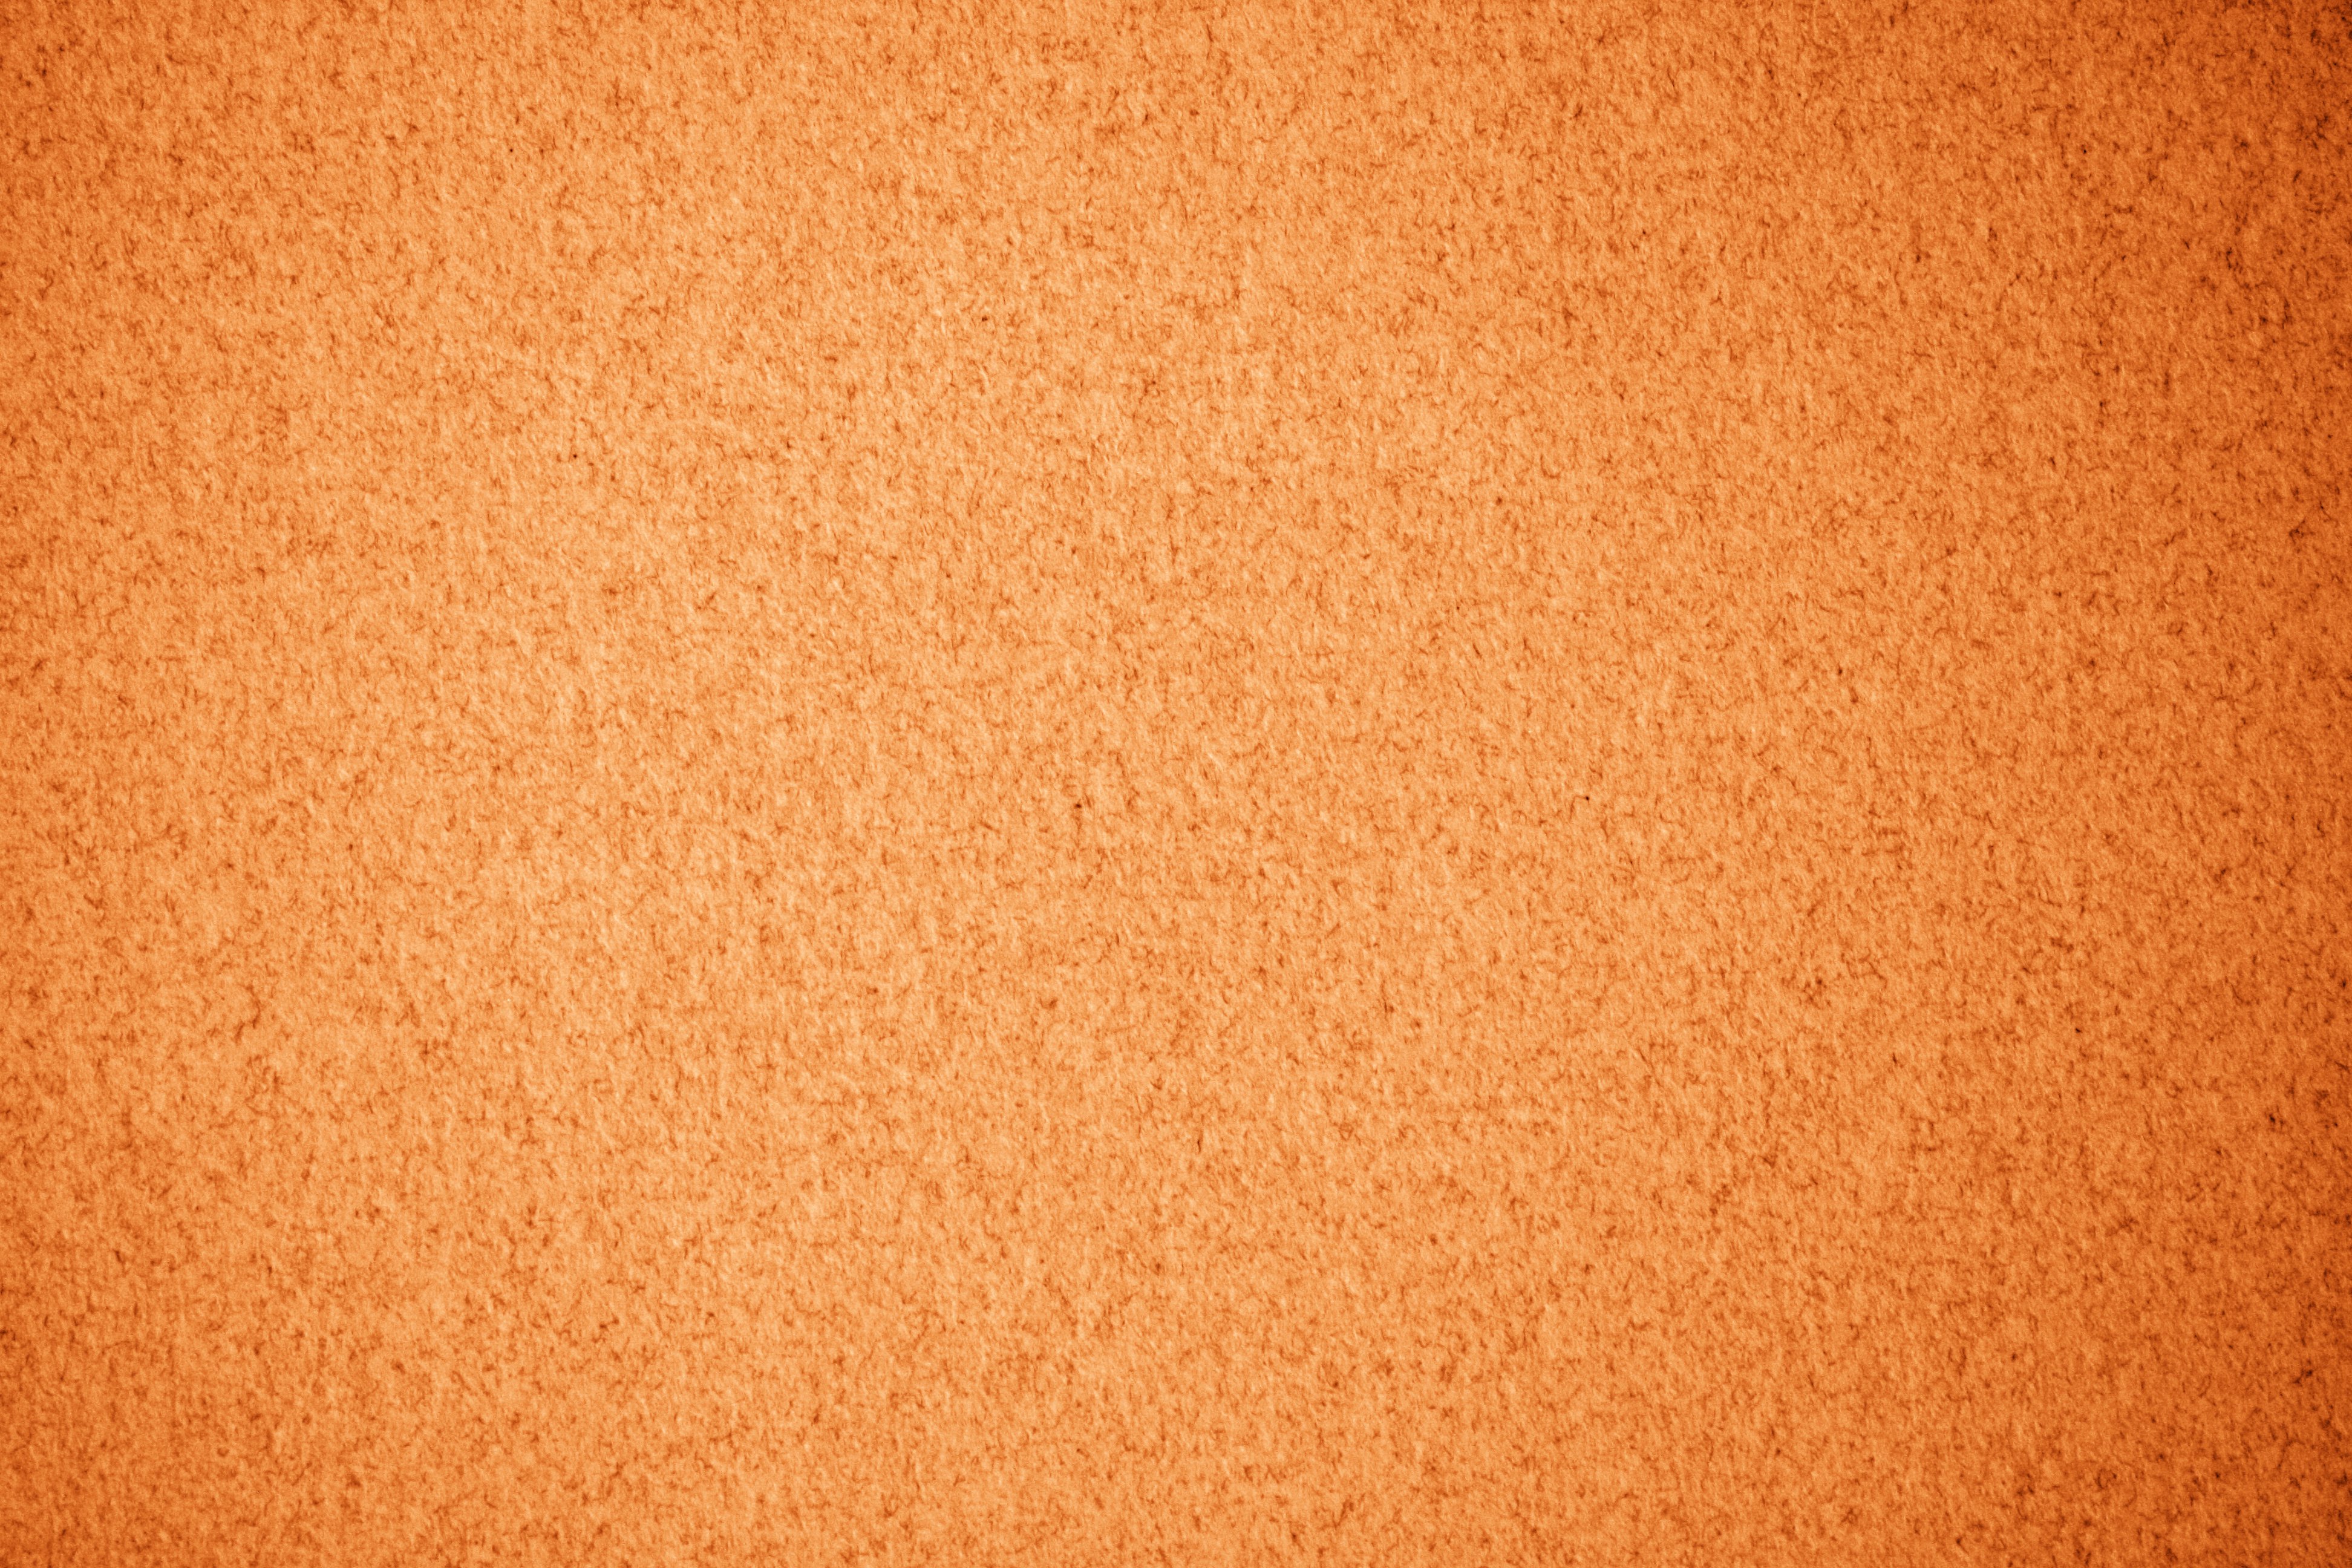 Orange Speckled Paper Texture Picture, Free Photograph